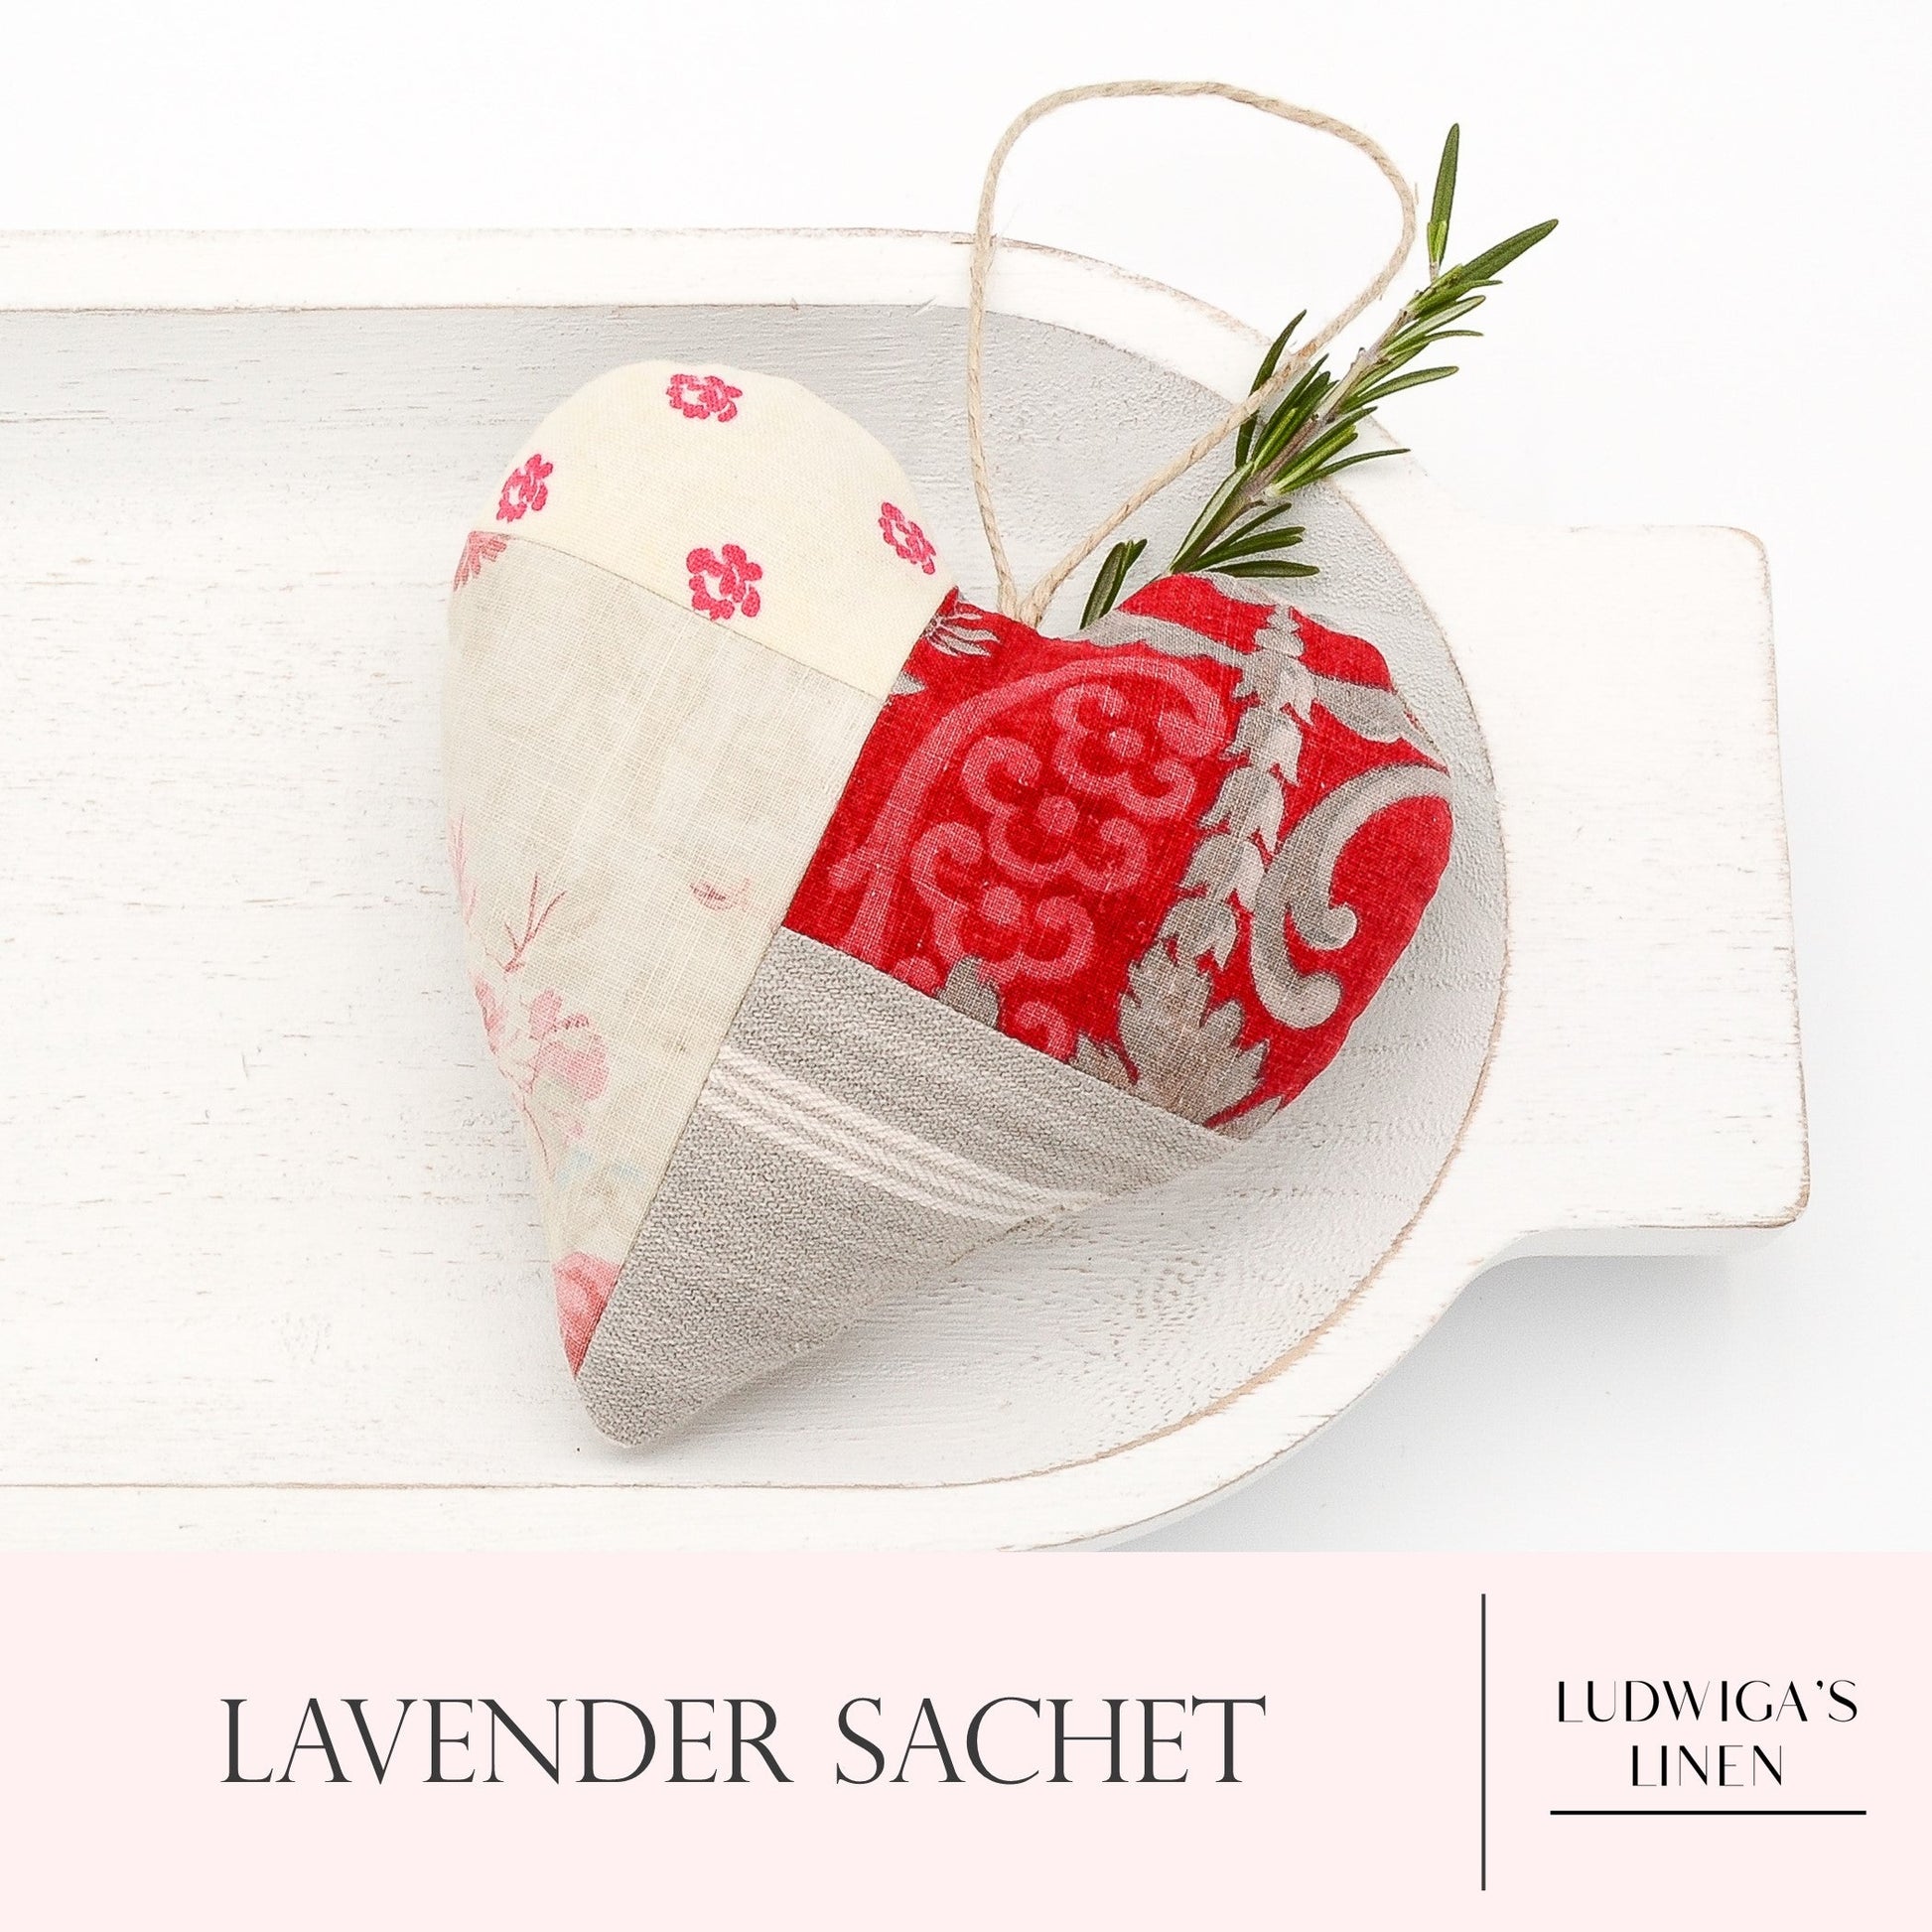 Antique/vintage French cotton and linen lavender sachet heart, hemp twine tie and filled with high quality lavender from Provence France